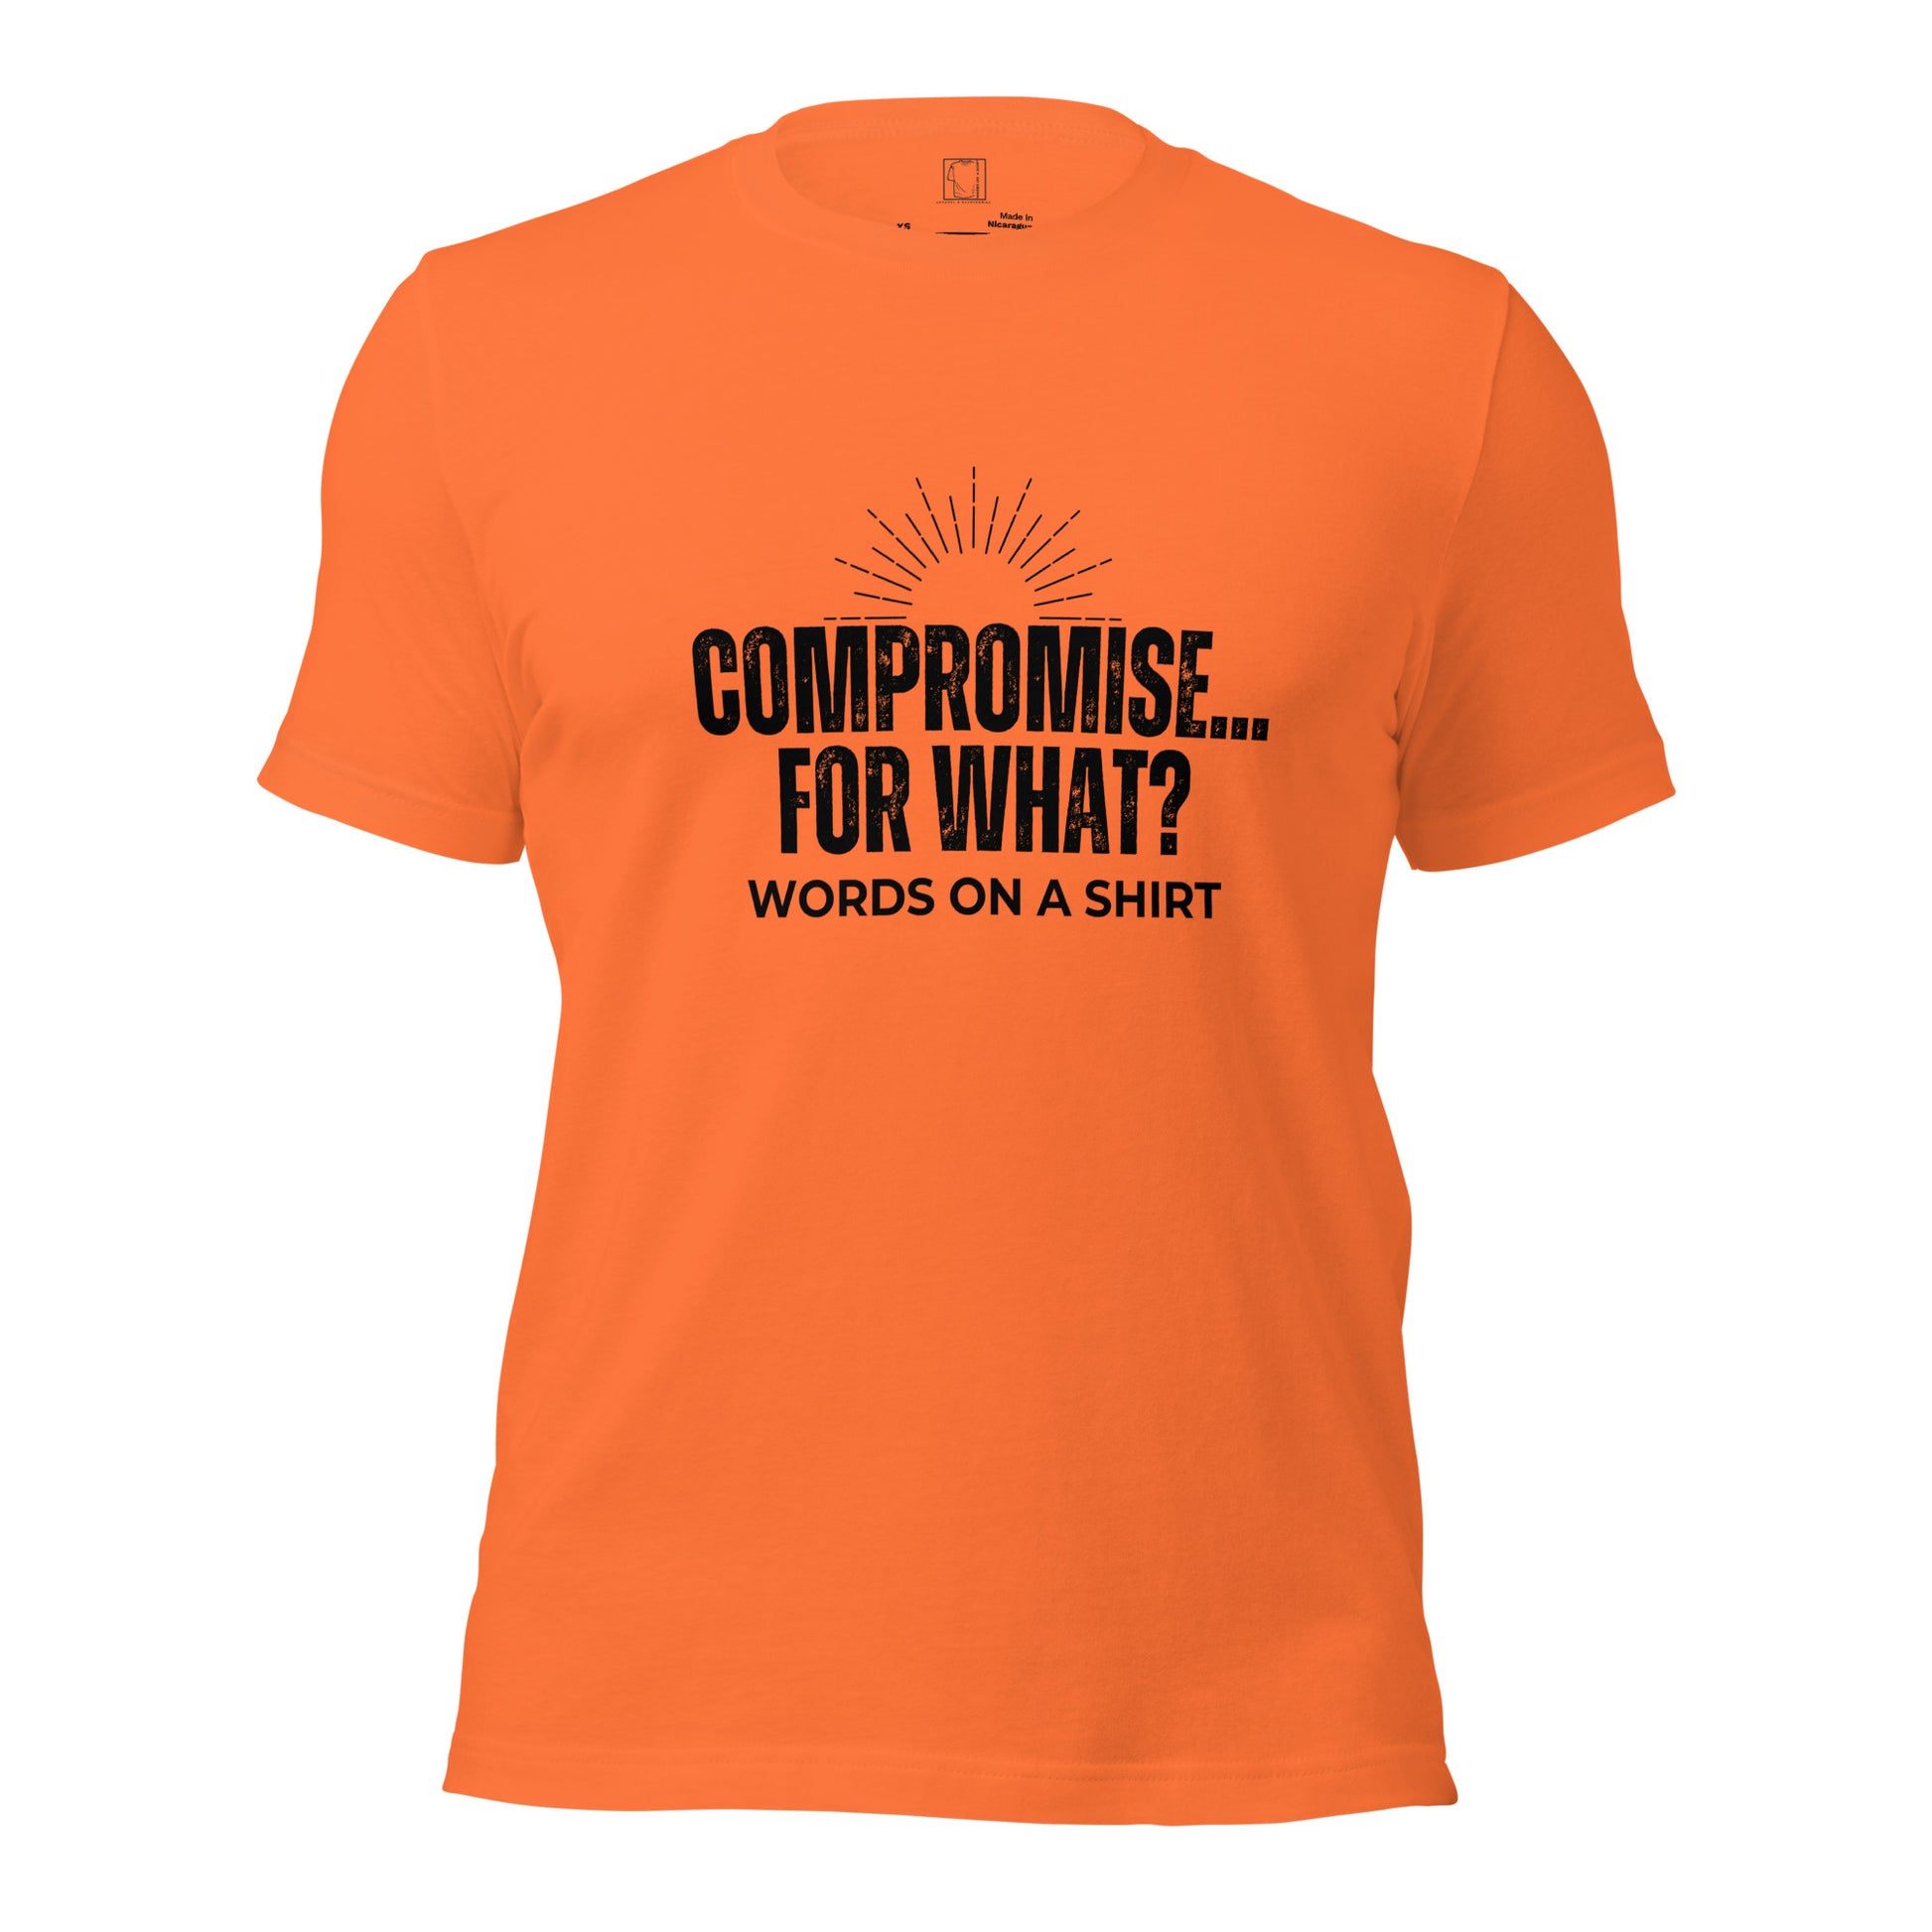 Get ready to rock your style with this killer 100% cotton tee! It's got all the must-haves: pre-shrunk fabric, side-seamed construction, and the perfect fit. Oh, and don't forget our quirky phrase, "Compromise For What."